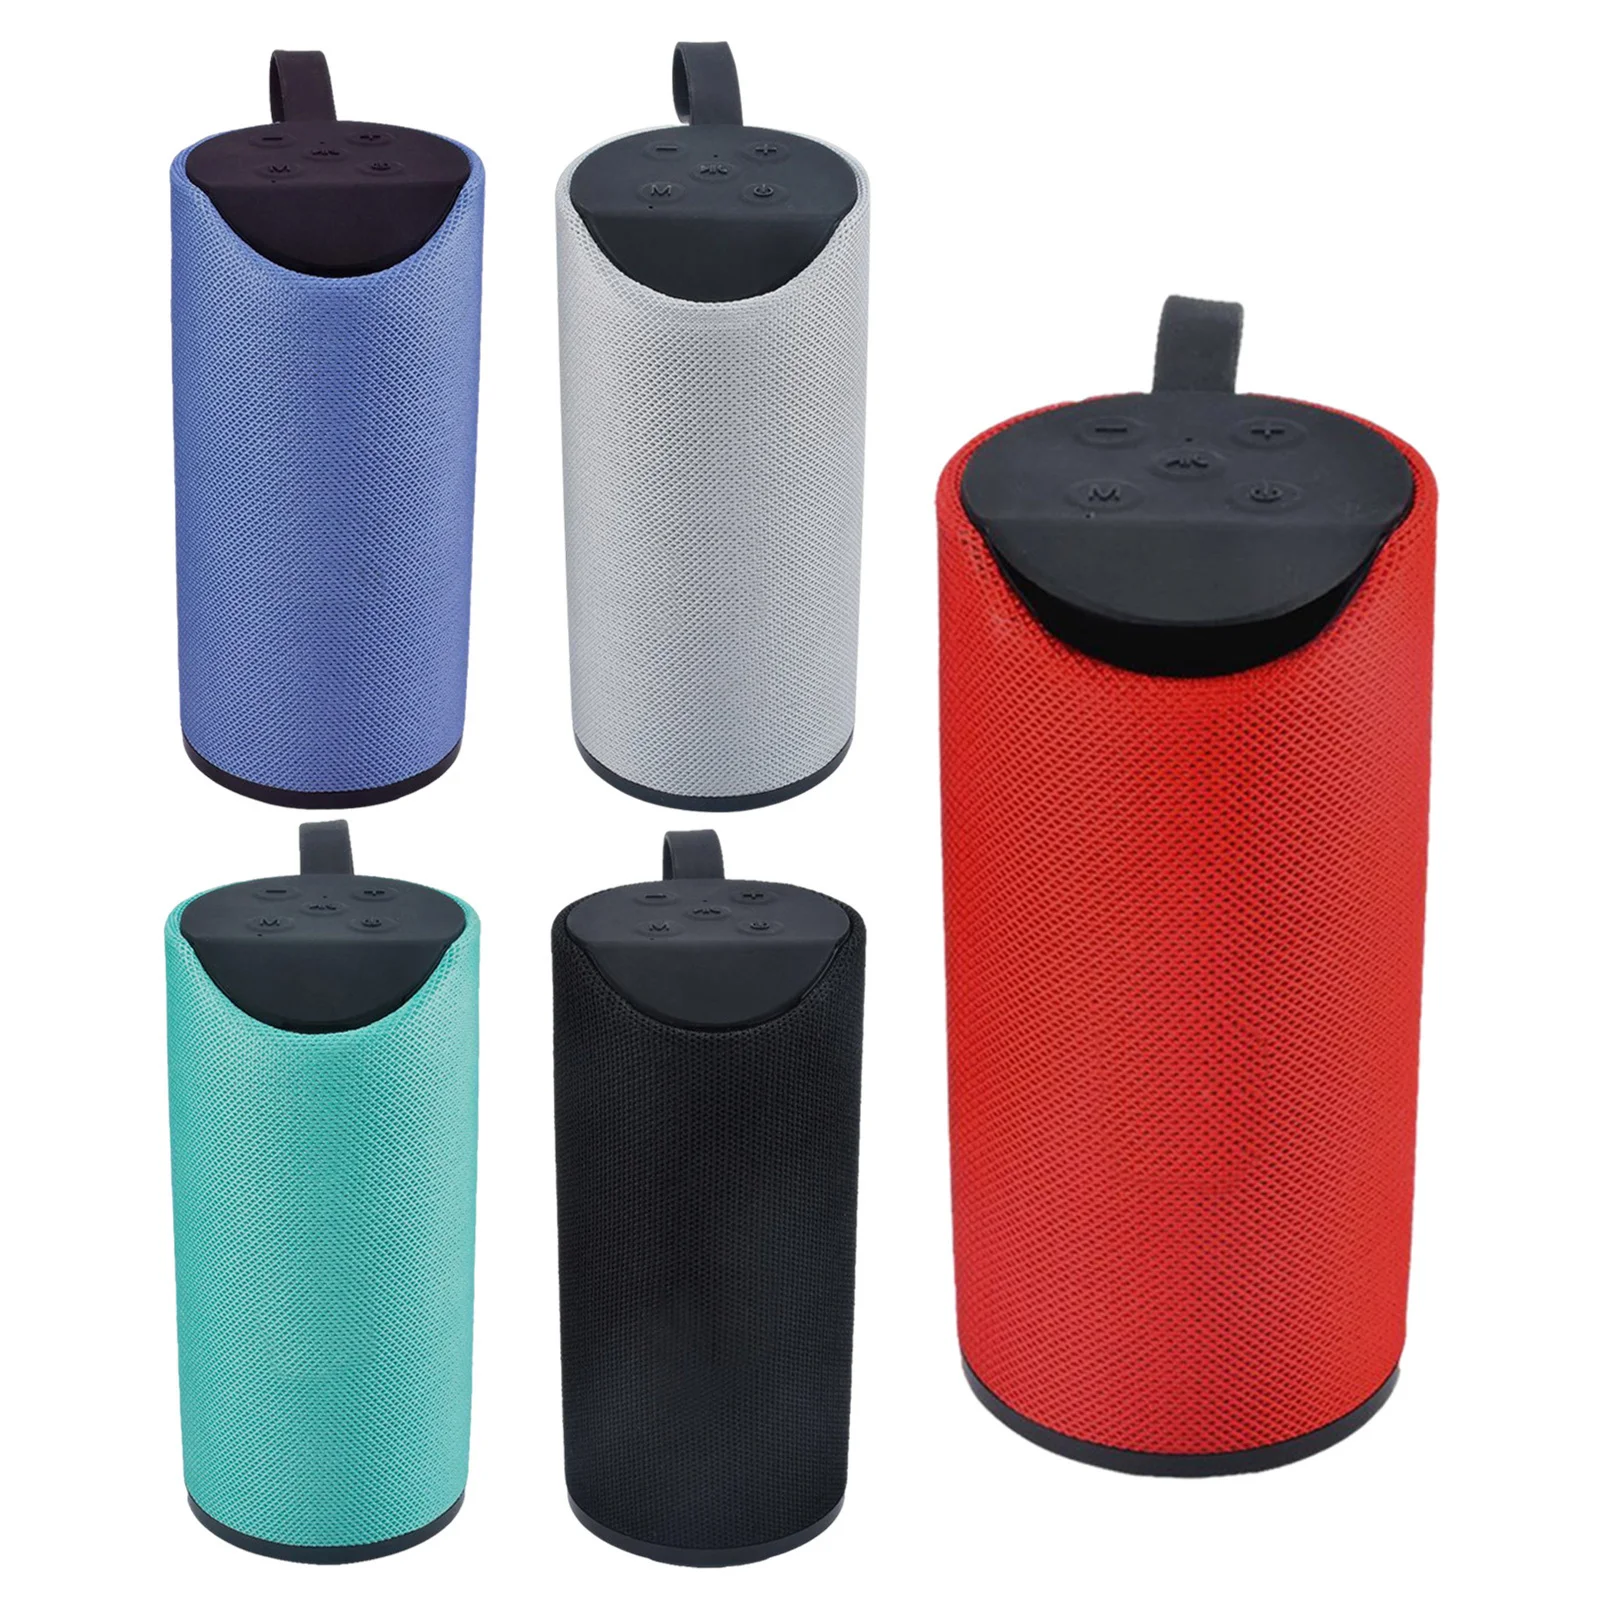 

Portable Bluetooth Speaker Wireless 5.0 800mAh Built-in Mic Home Office Biking Outdoor Bicycle Beach Surprise price Recommend